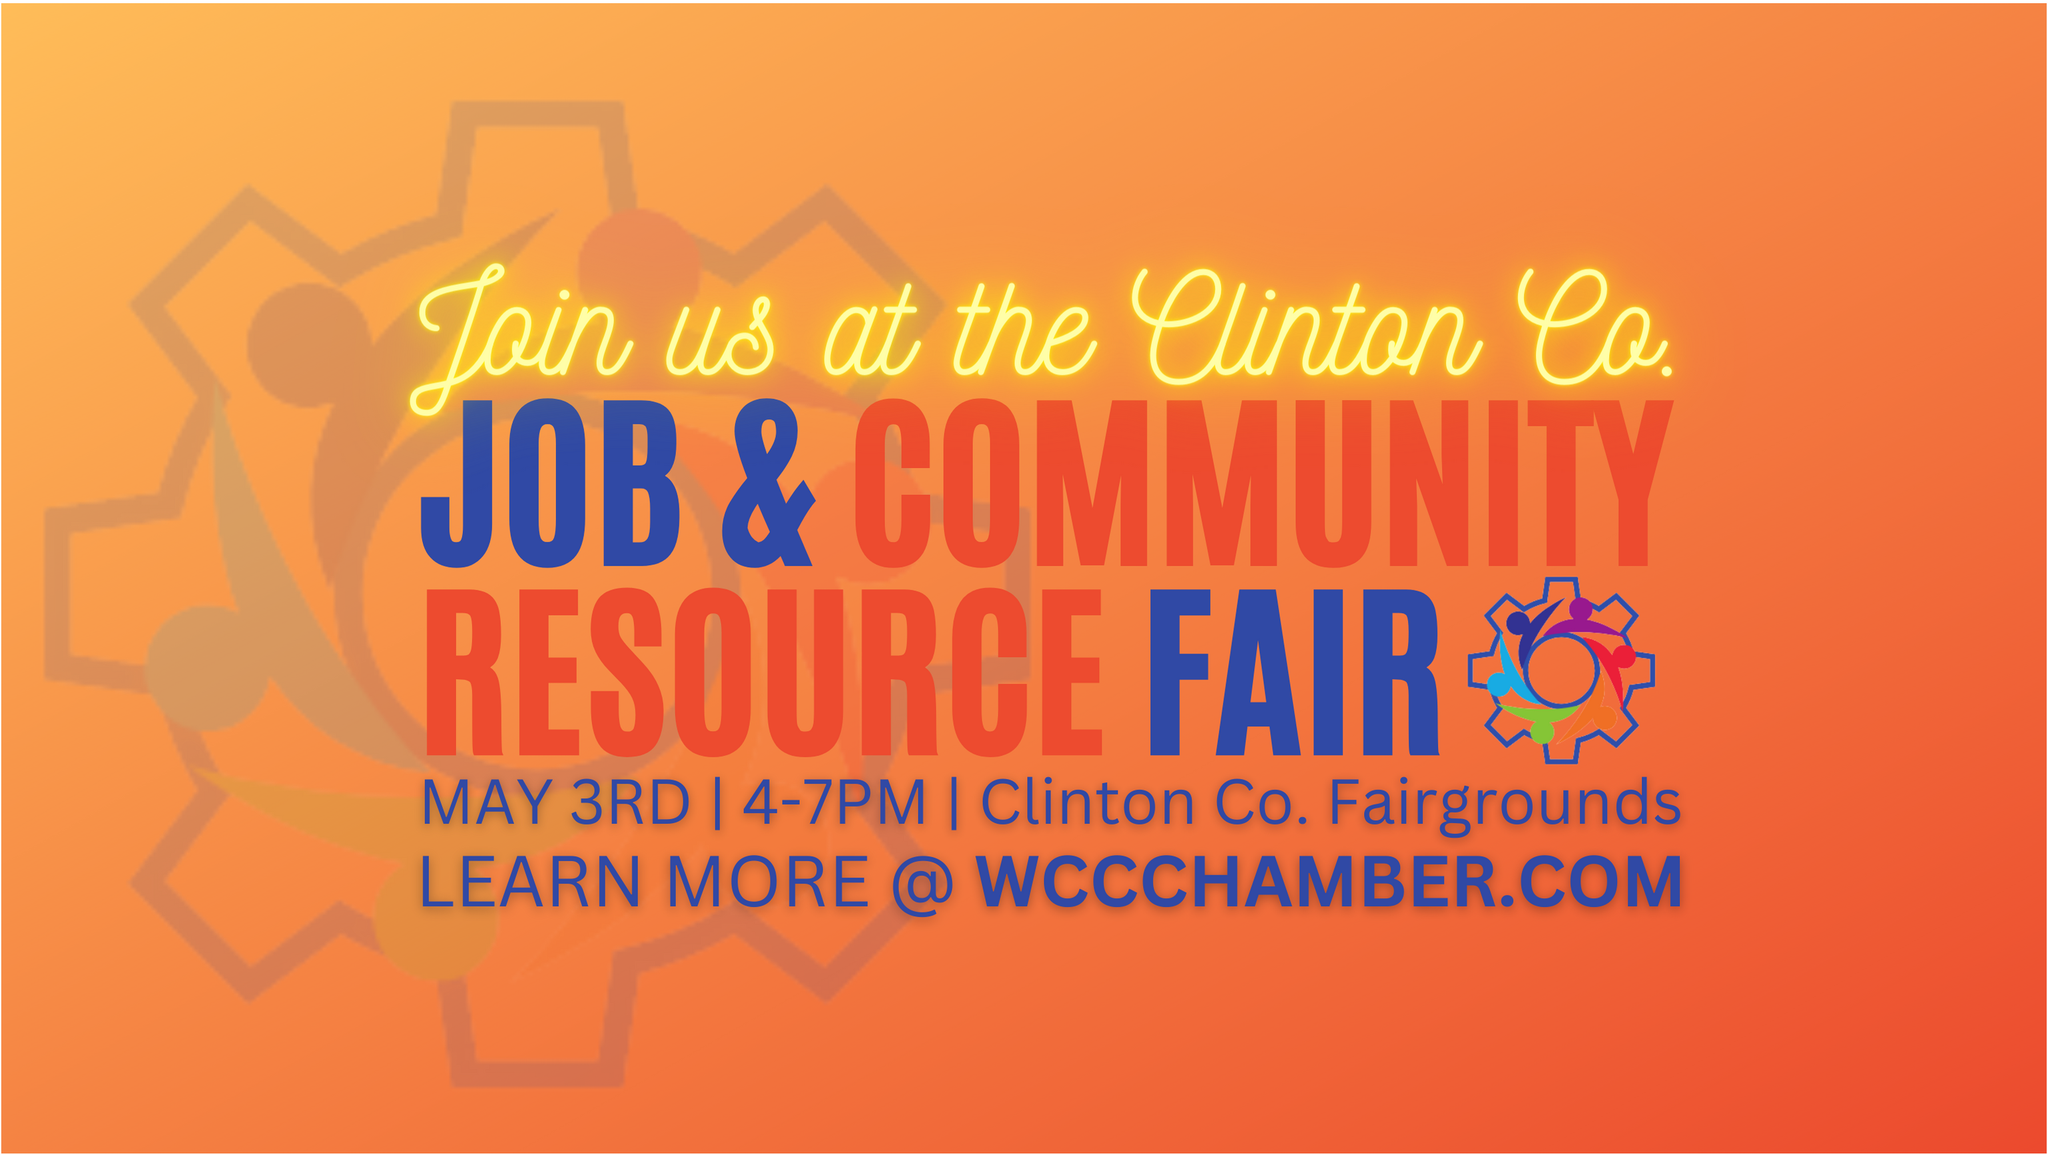 Click the Focus on Collaboration for Workforce Development in Clinton County, Ohio Slide Photo to Open